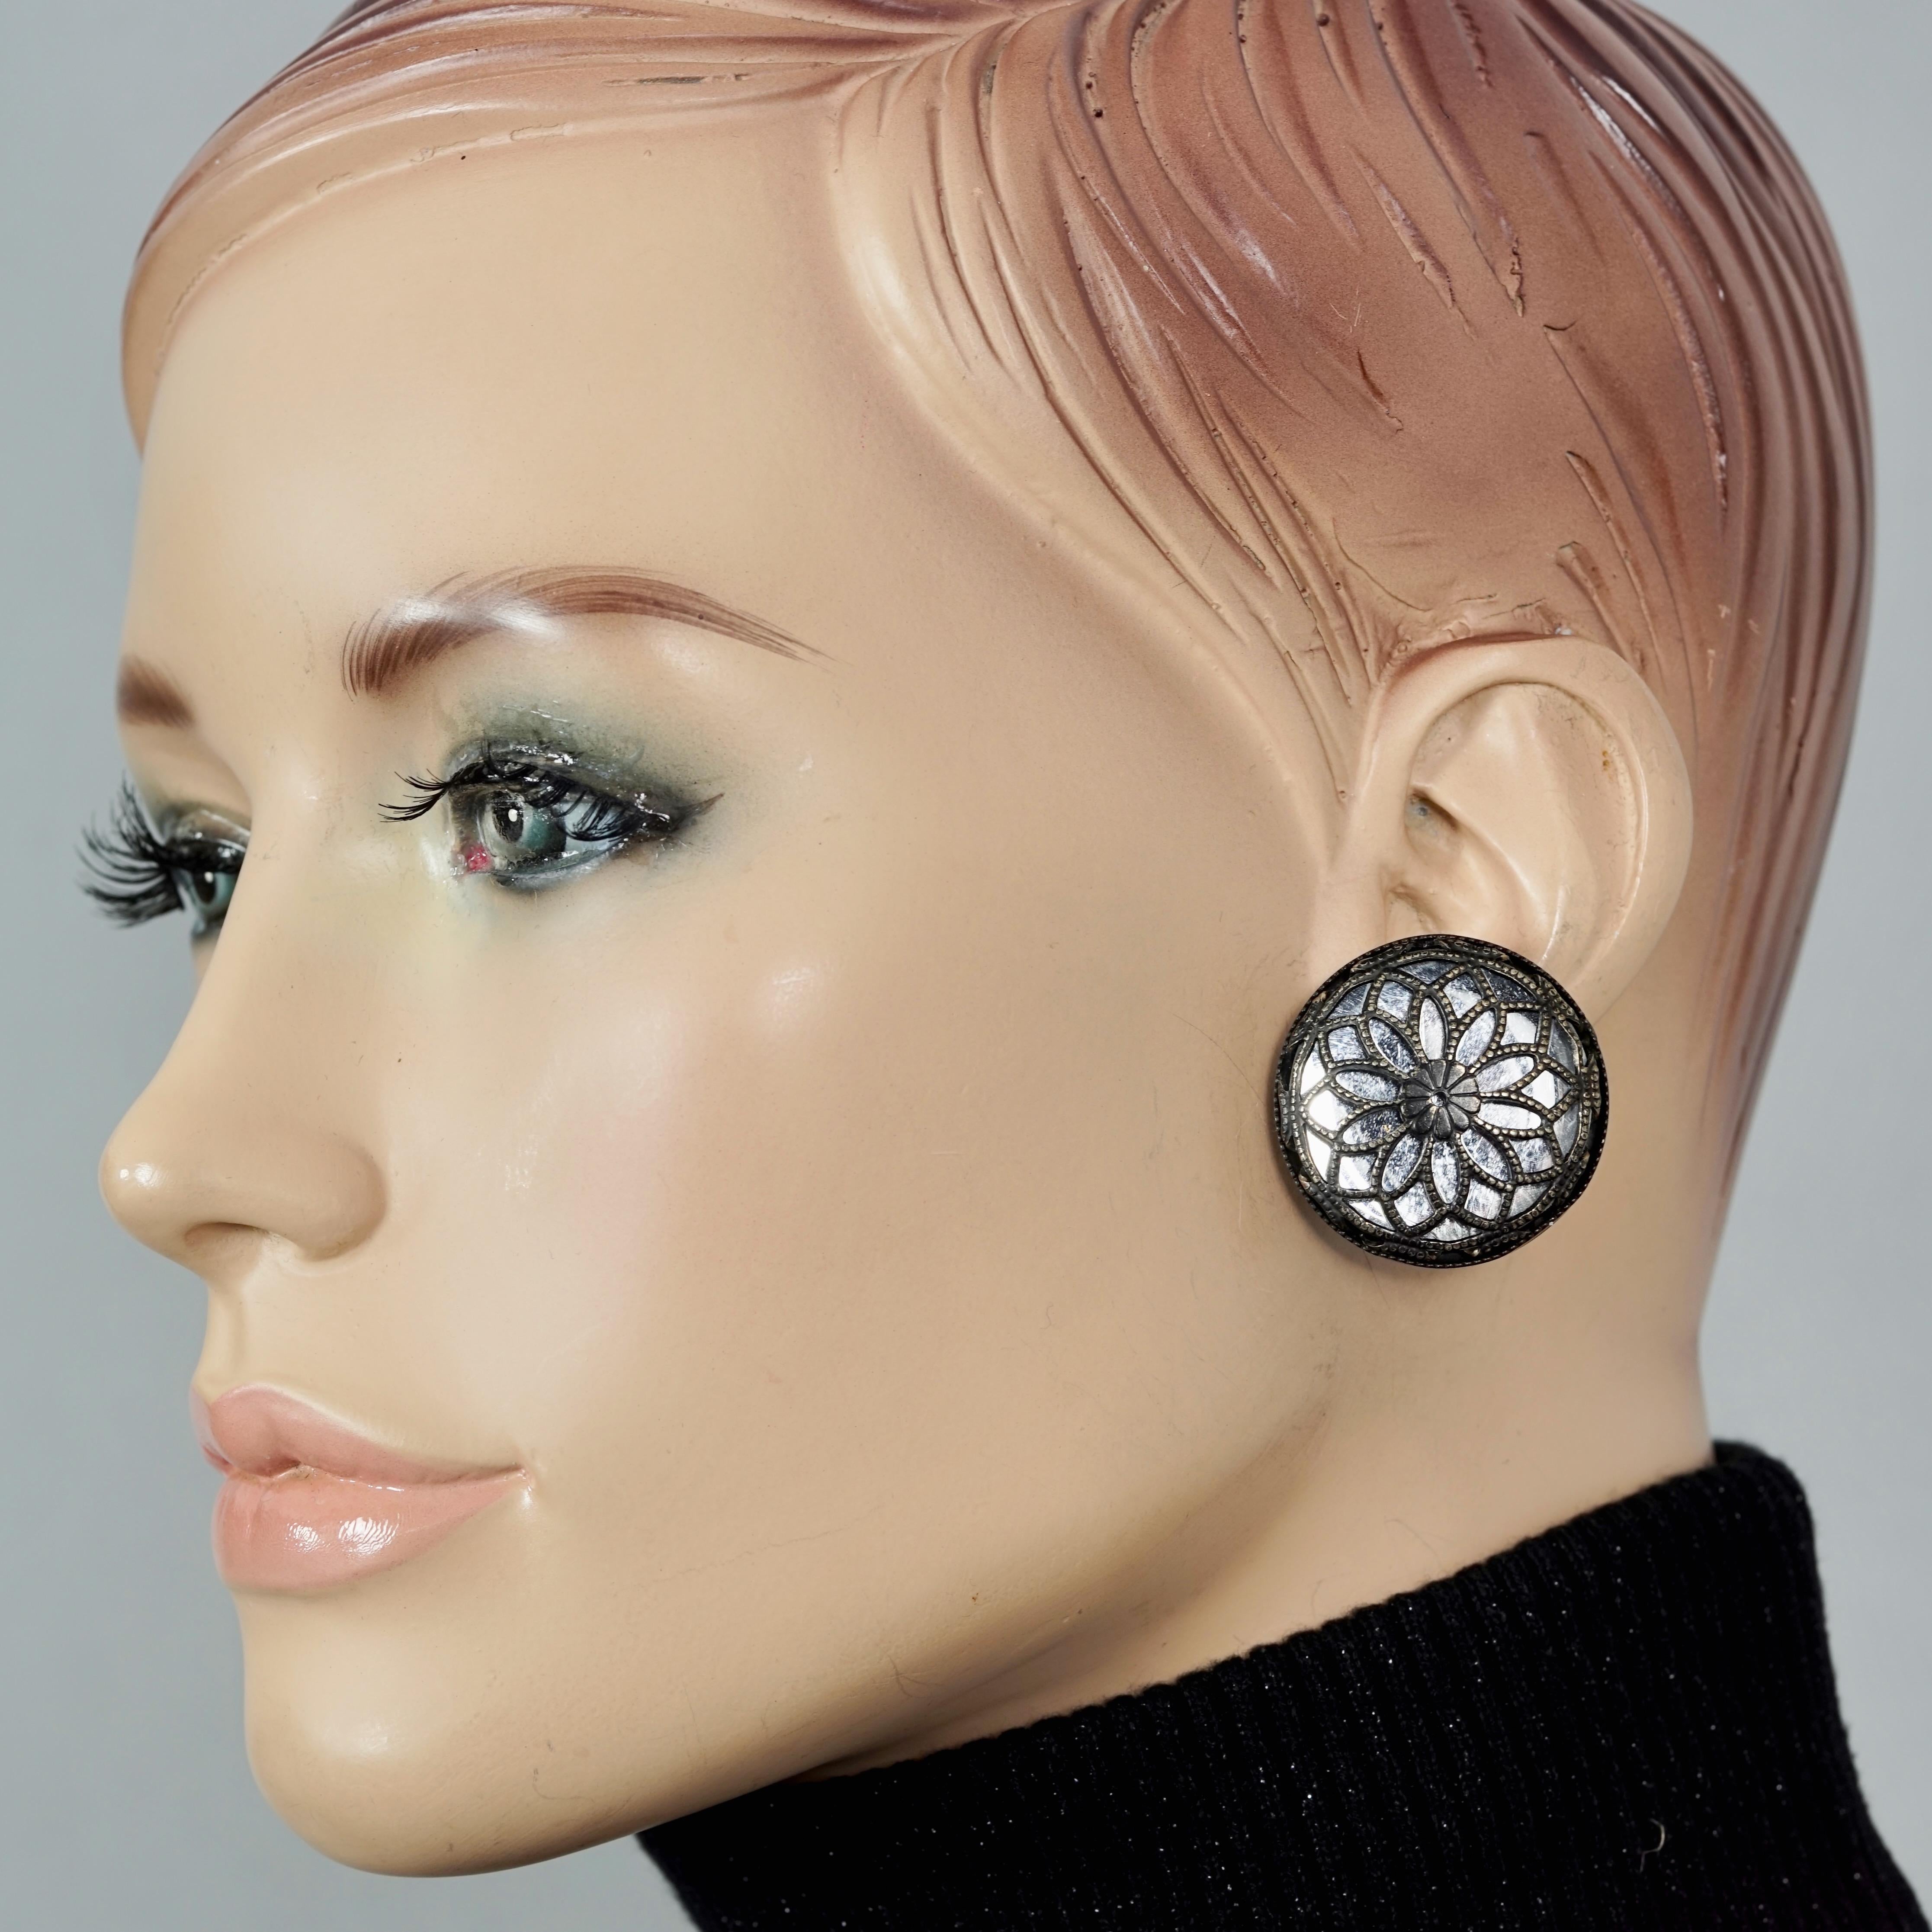 Vintage PACO RABANNE Cutout Flower Mirror Disc Earrings

Measurements:
Height: 1.22 inches (3.1 cm)
Width: 1.22 inches (3.1 cm)
Weight per Earring: 9 grams

Features:
- 100% Authentic PACO RABANNE.
- Openwork flower mirror earrings.
- Gunmetal tone